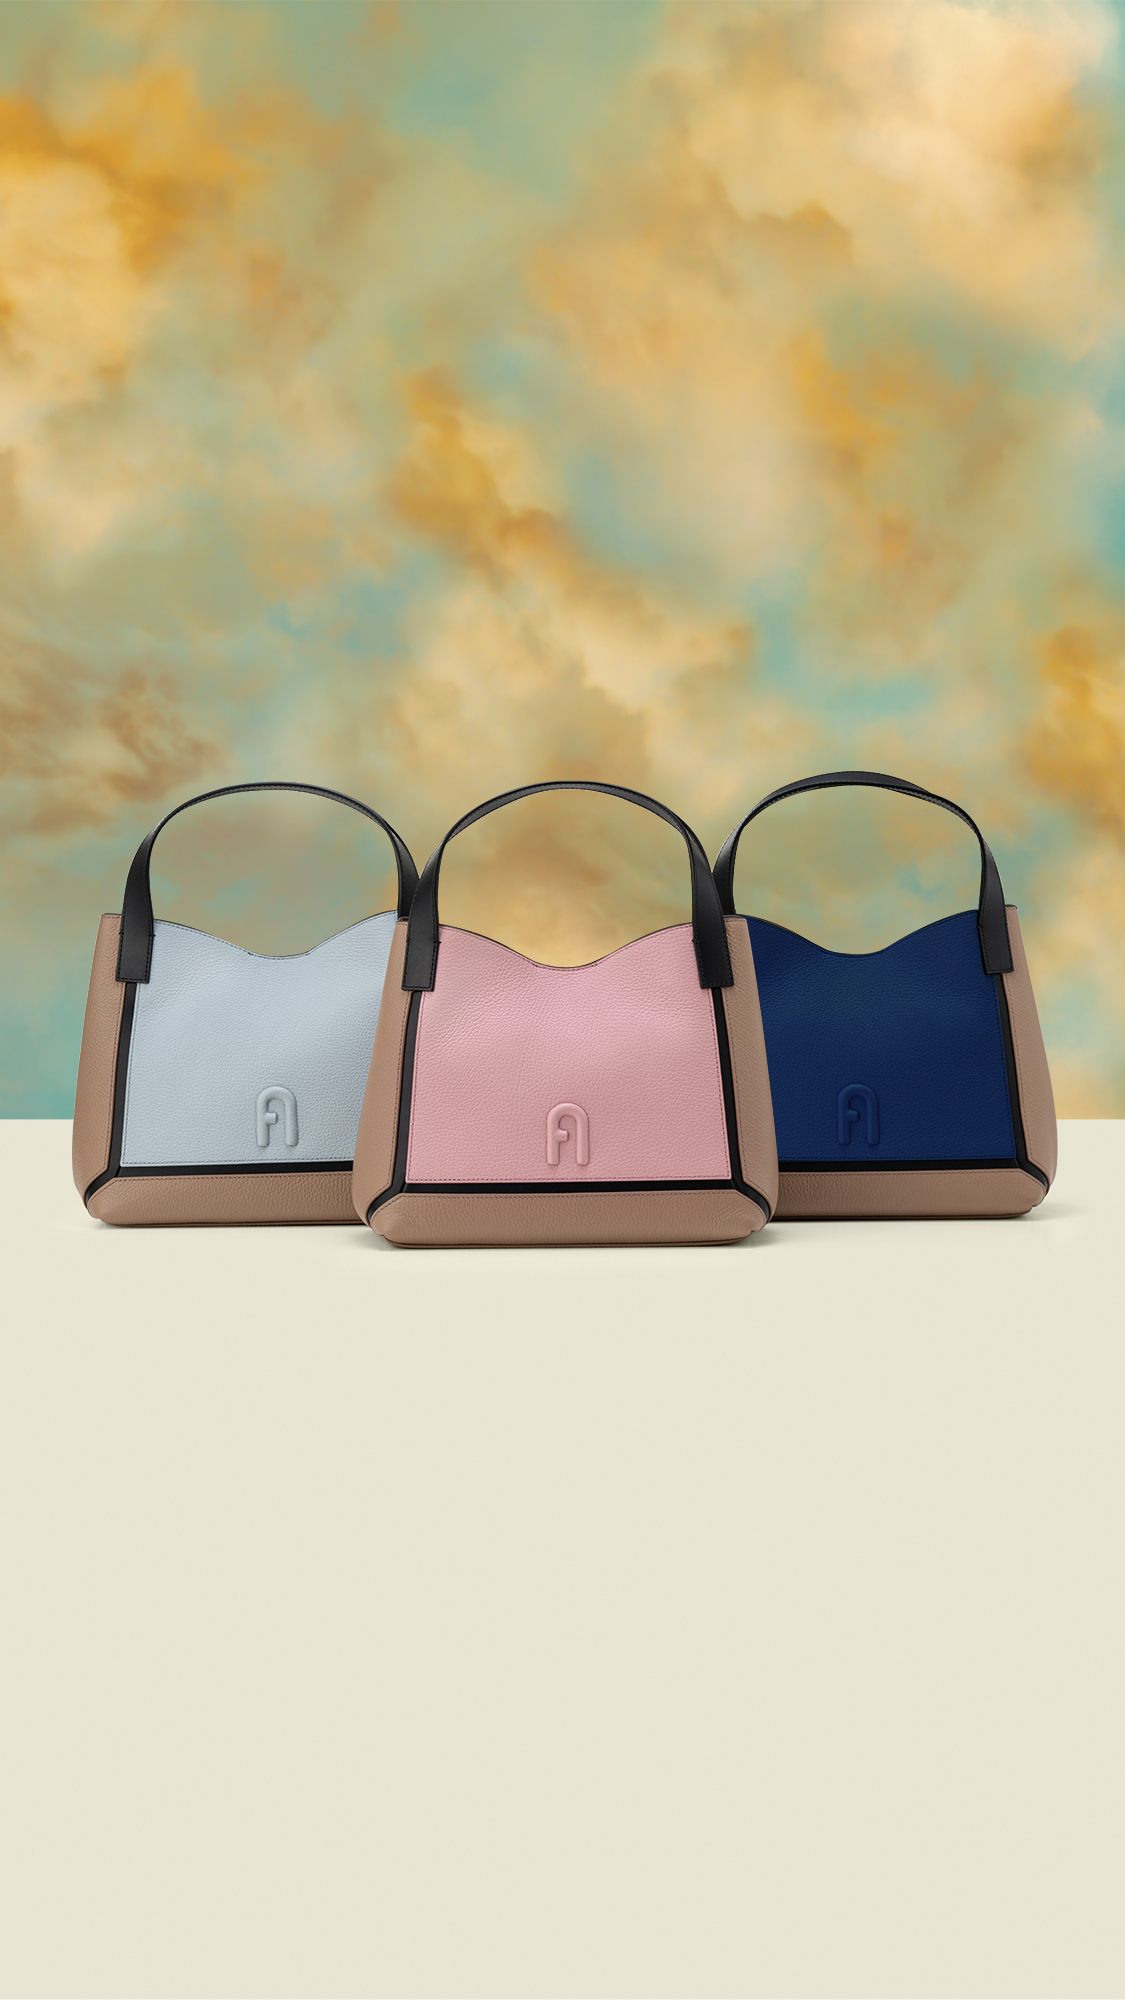 Furla | Online Store and Official Site - Bags, Wallets and Accessories